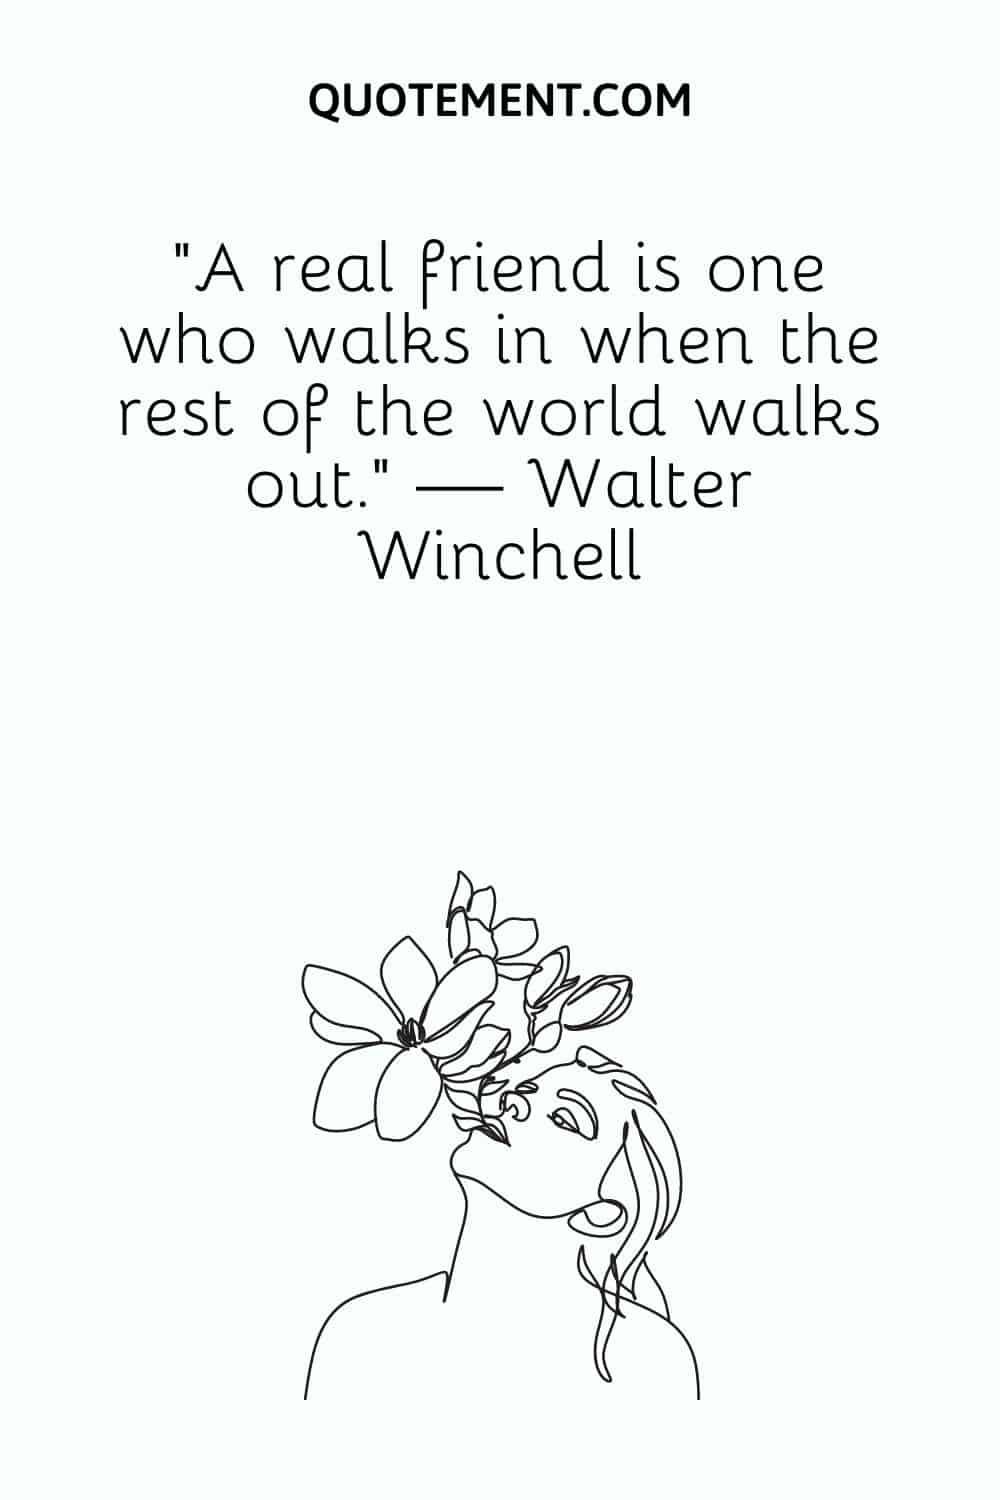 A real friend is one who walks in when the rest of the world walks out.